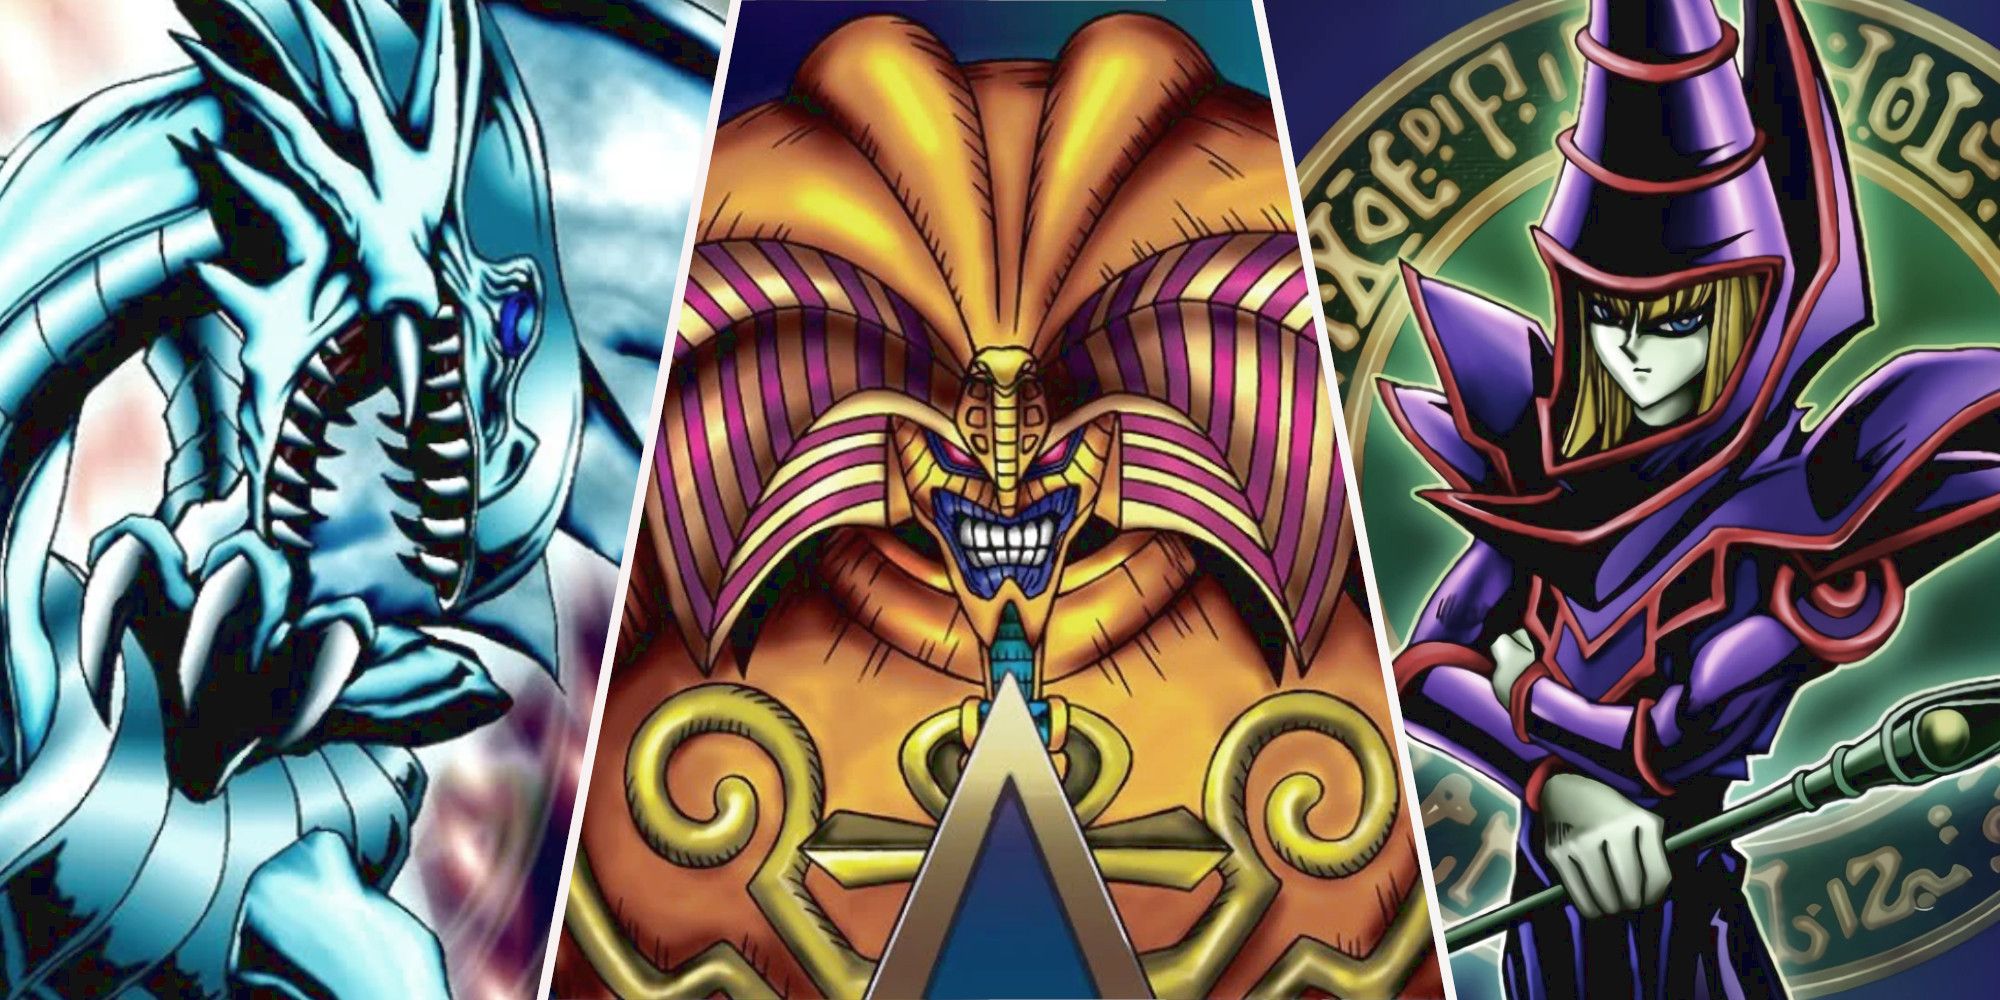 Collage image of Blue Eyes White Dragon, Exodia, and Dark Magician card art from YuGiOh